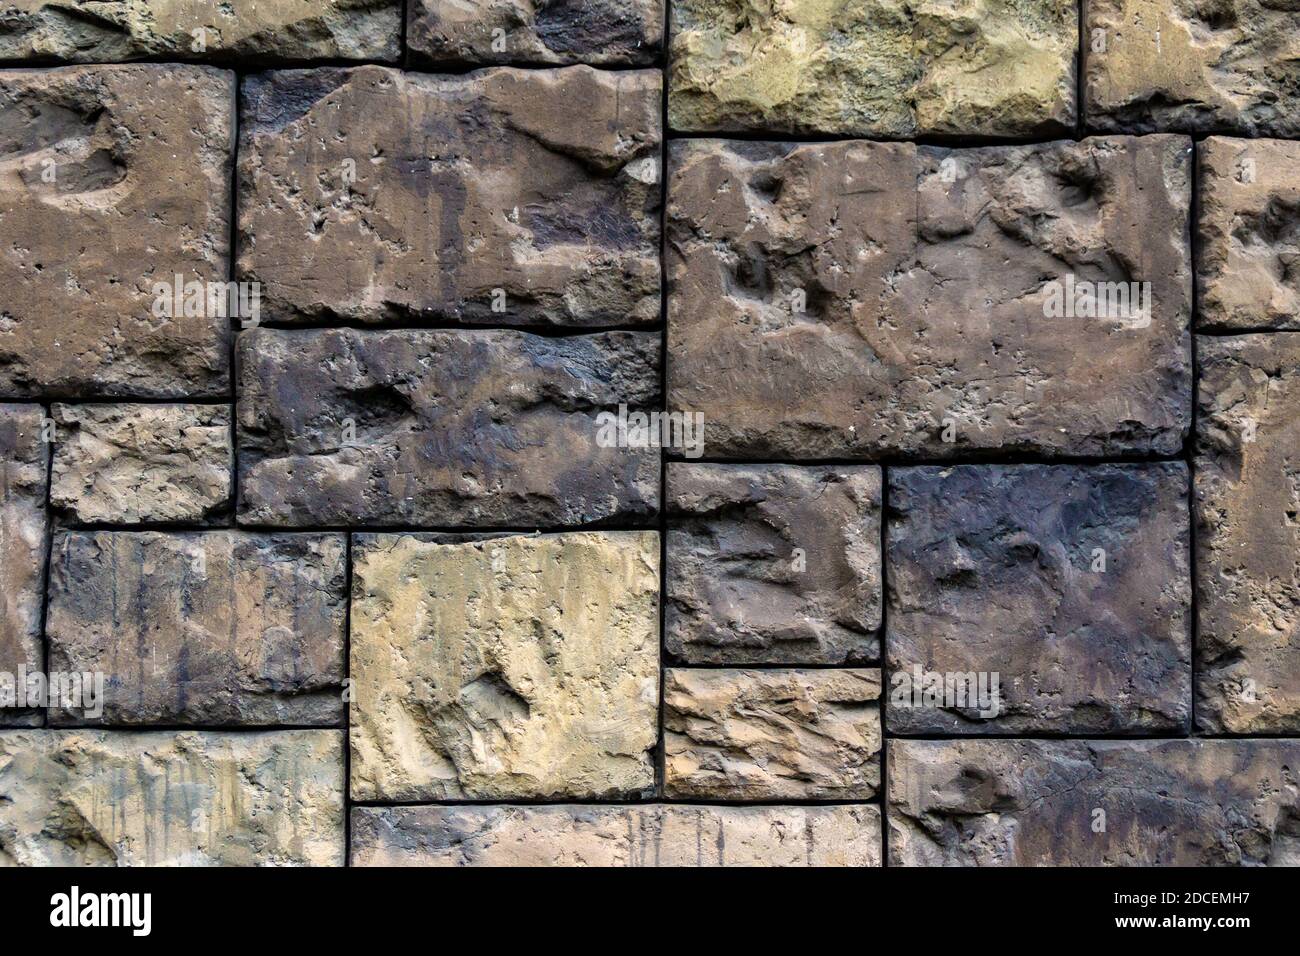 wall made of large hewn stones of various sizes, colors and structures Stock Photo